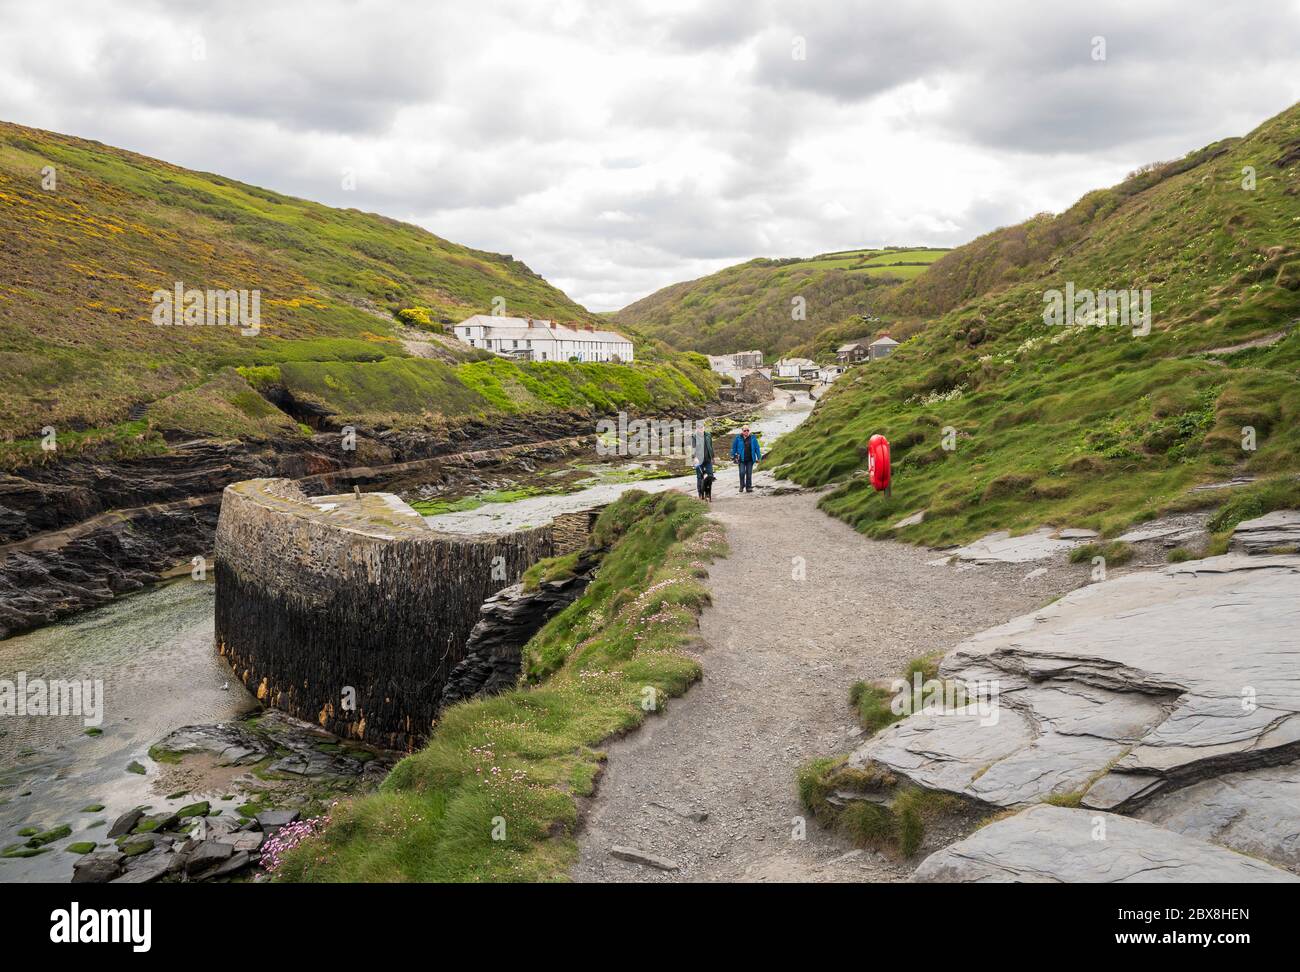 View of Boscastle harbour, a natural inlet protected by stone walls, at the mouth of the rivers Valency and Jordan.  Cornwall, England, UK. Stock Photo